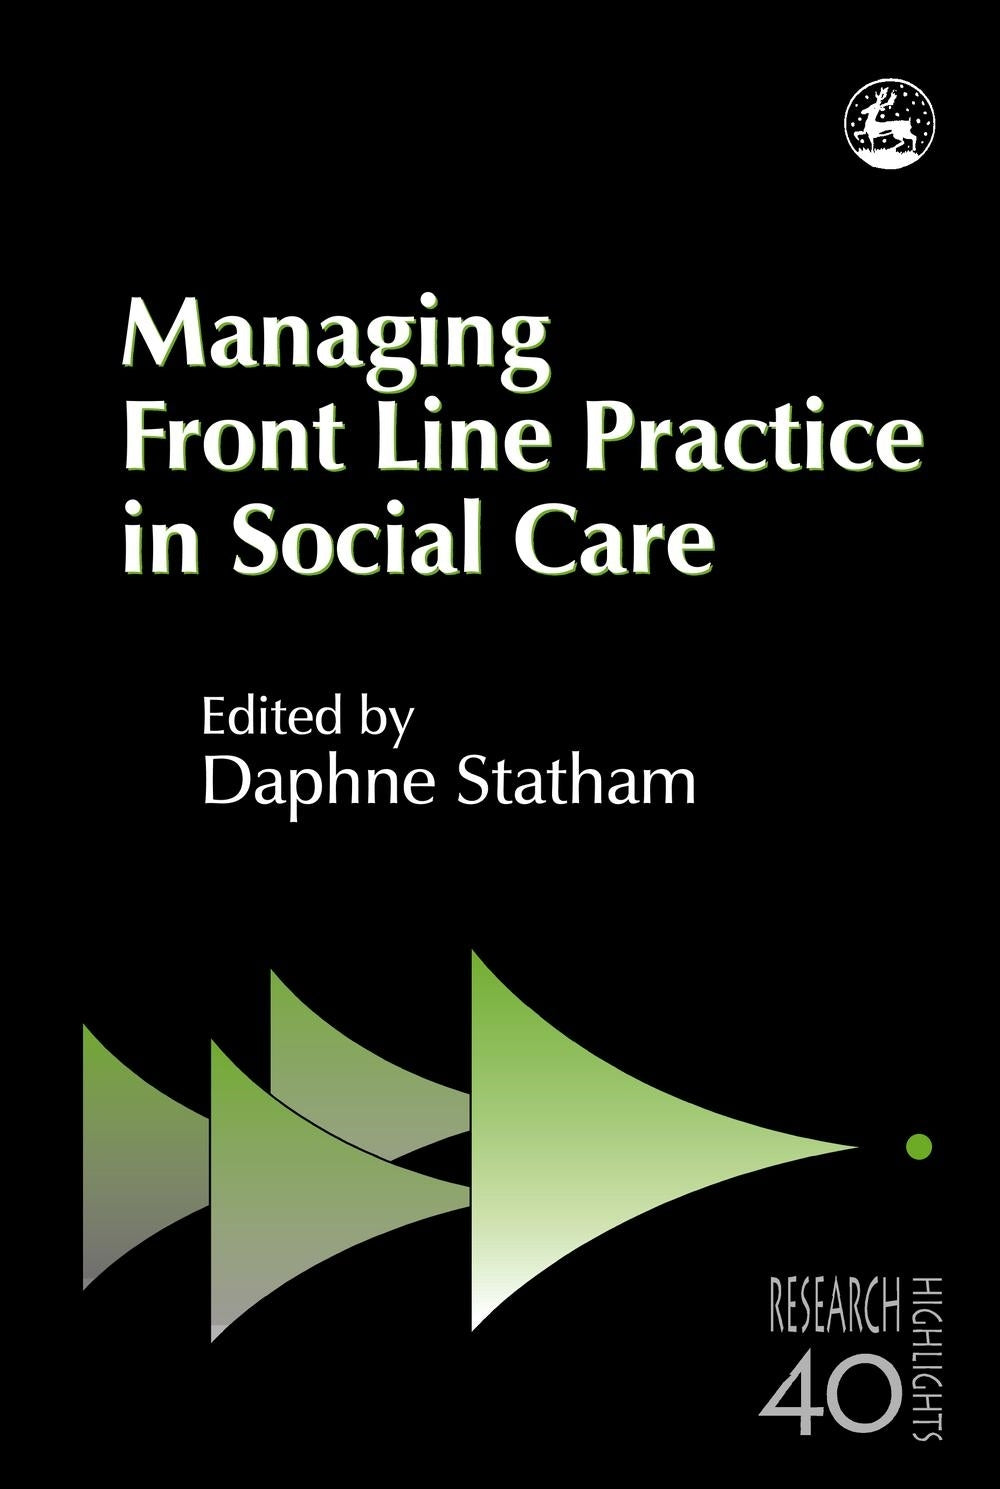 Managing Front Line Practice in Social Care by Daphne Statham